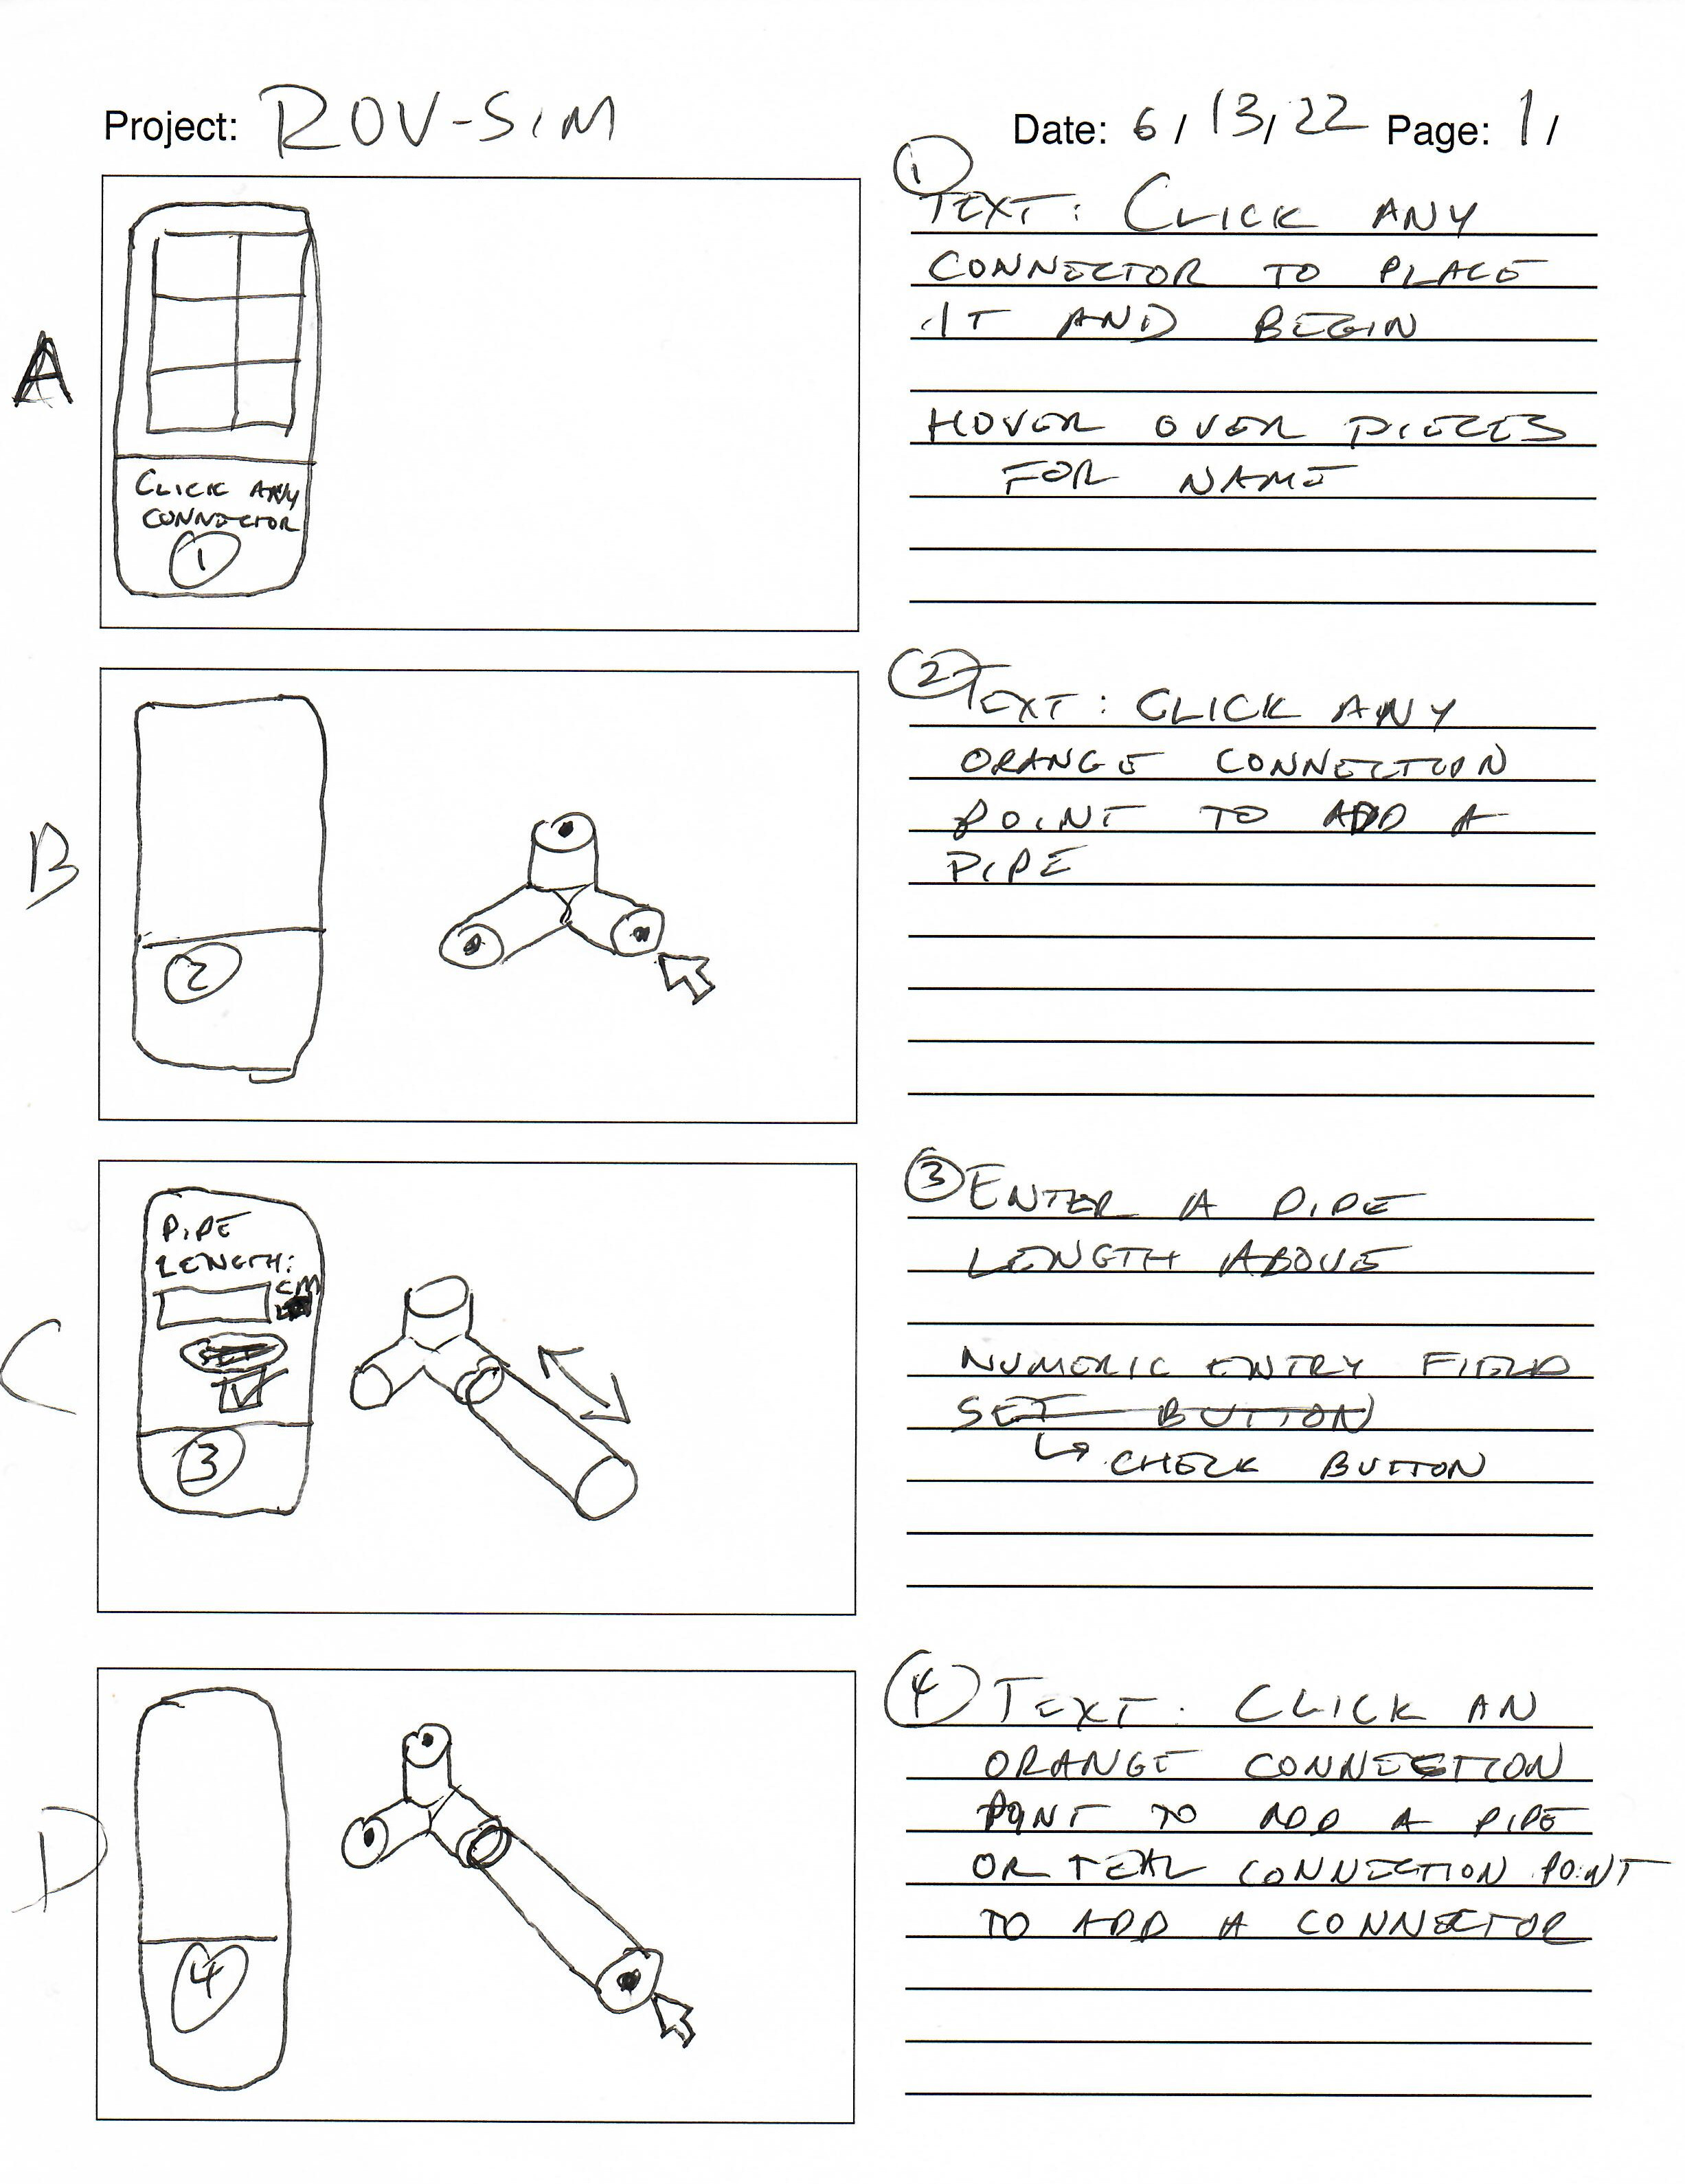 A page from my sketch prototype of the Build Lab showing a node-based build process